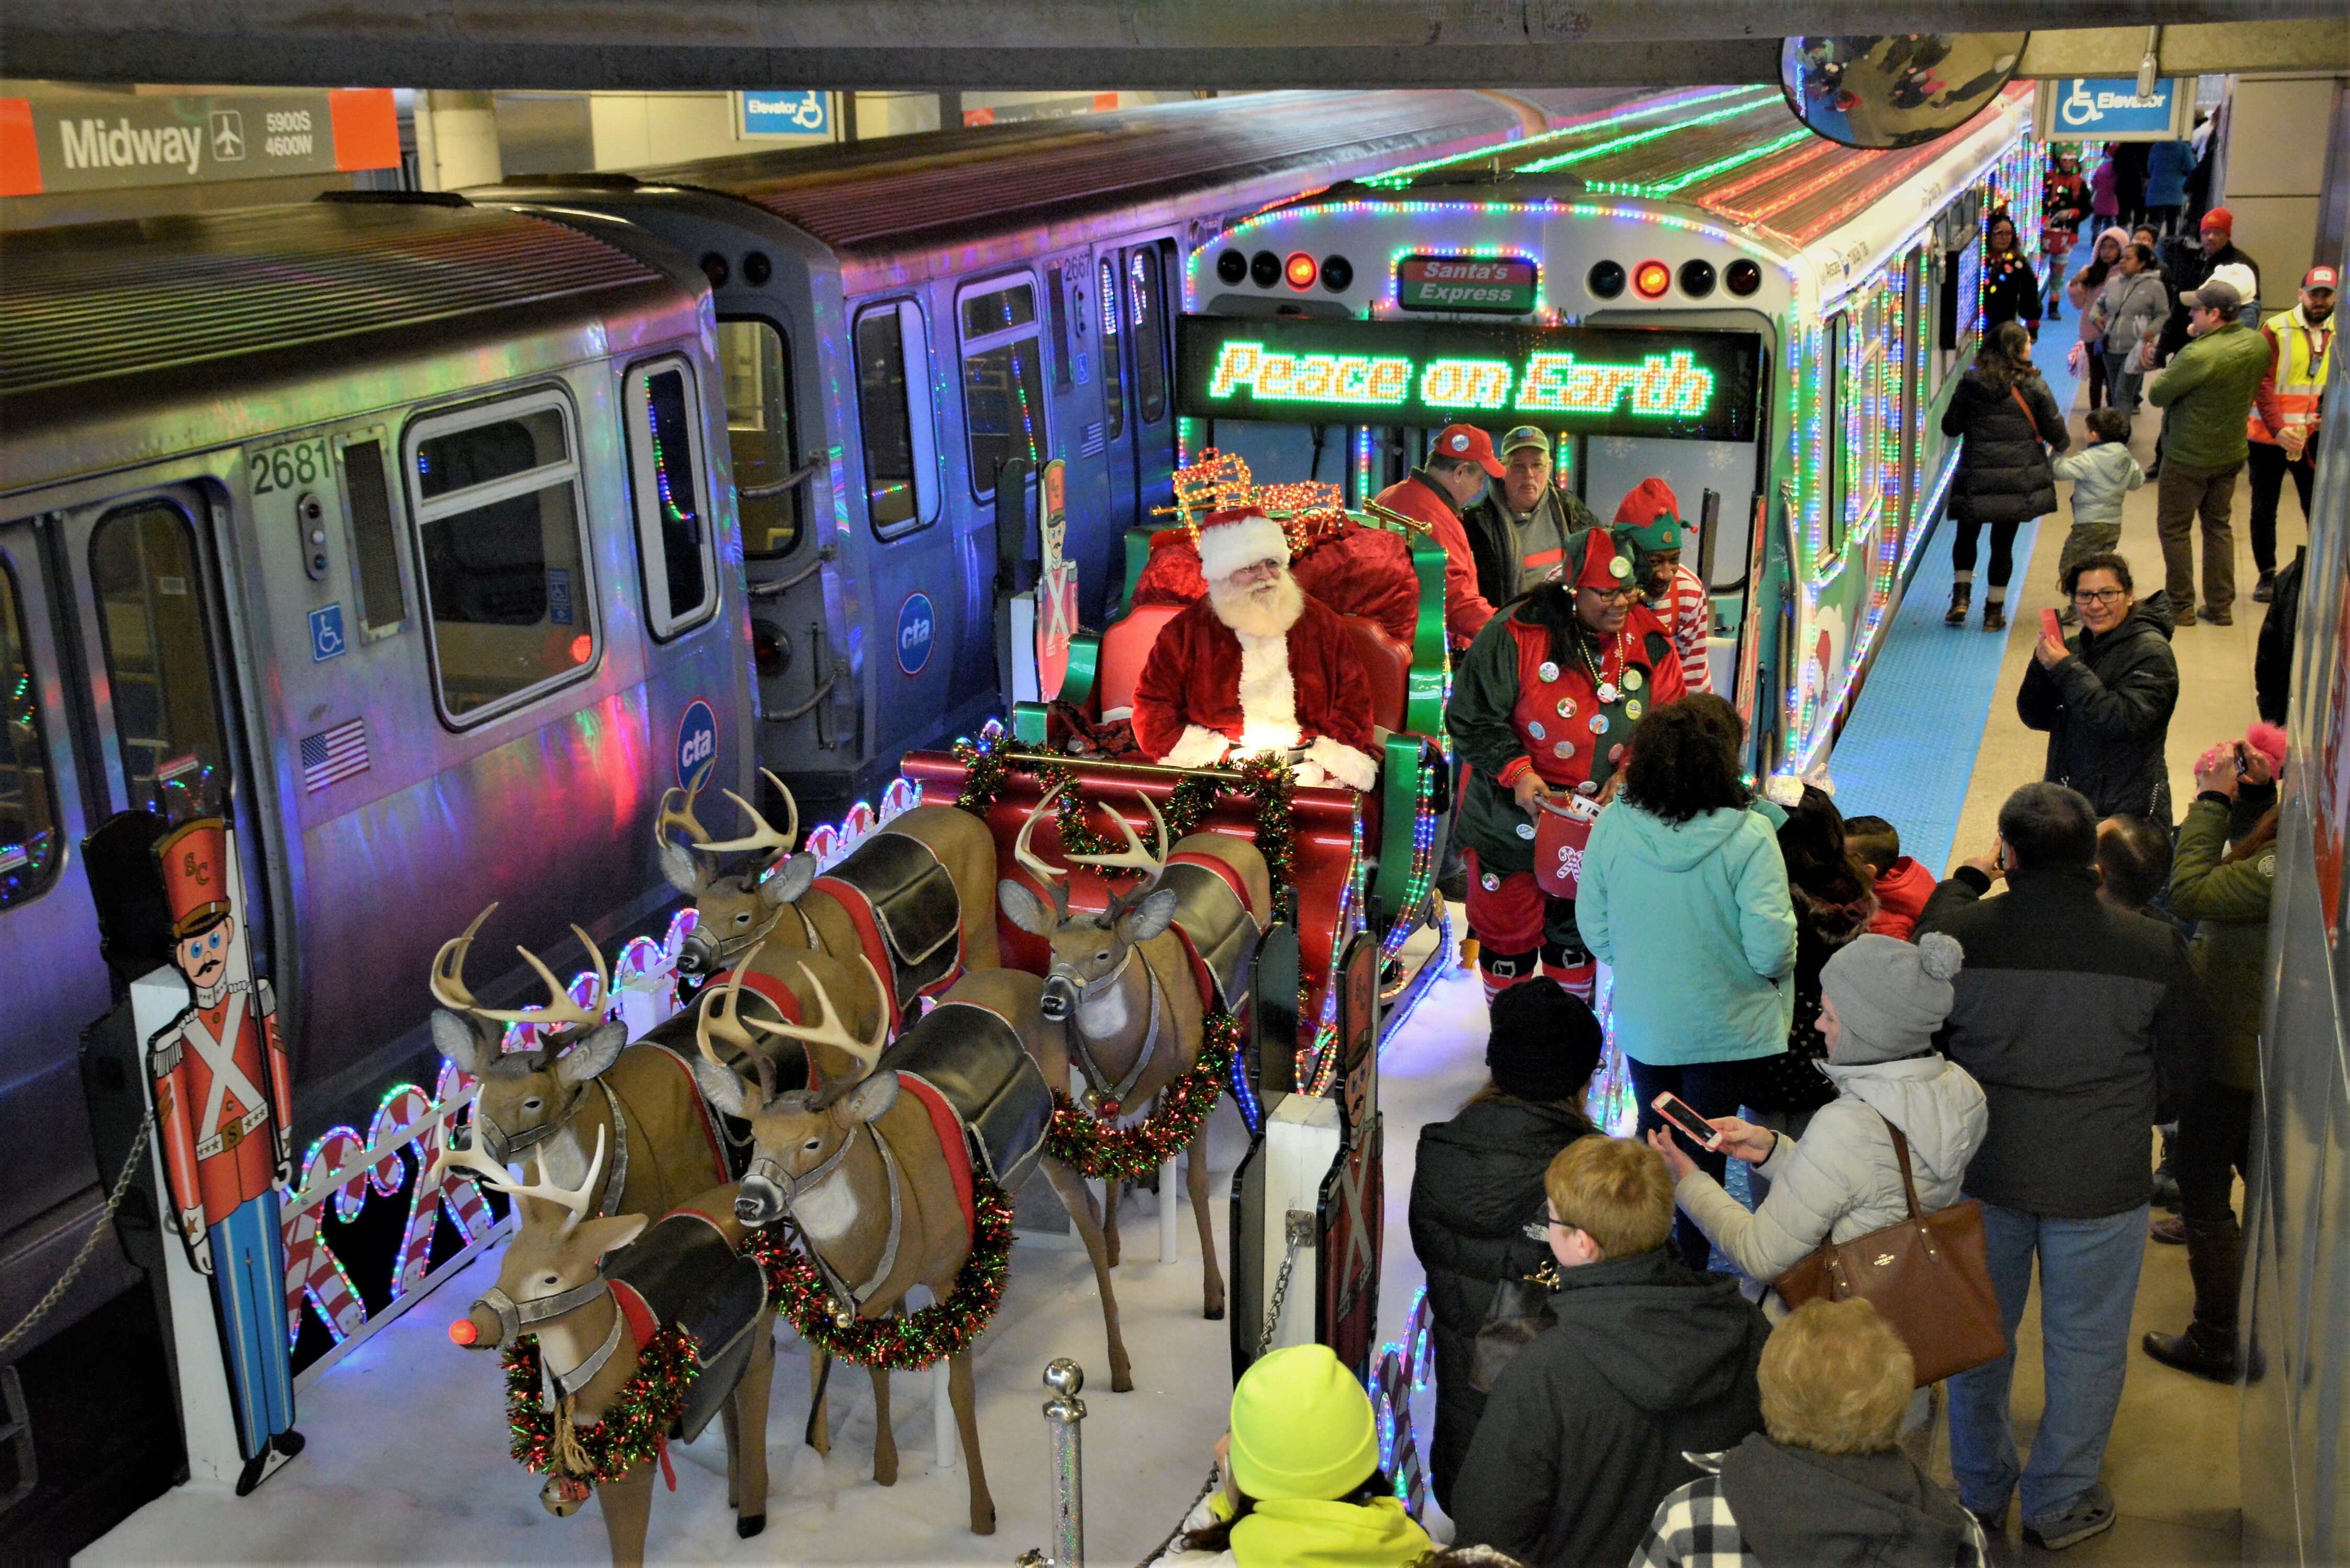 CTA, Metra Release Holiday Train Schedules. Here's Where and When You'll Be Able to Hop on Board